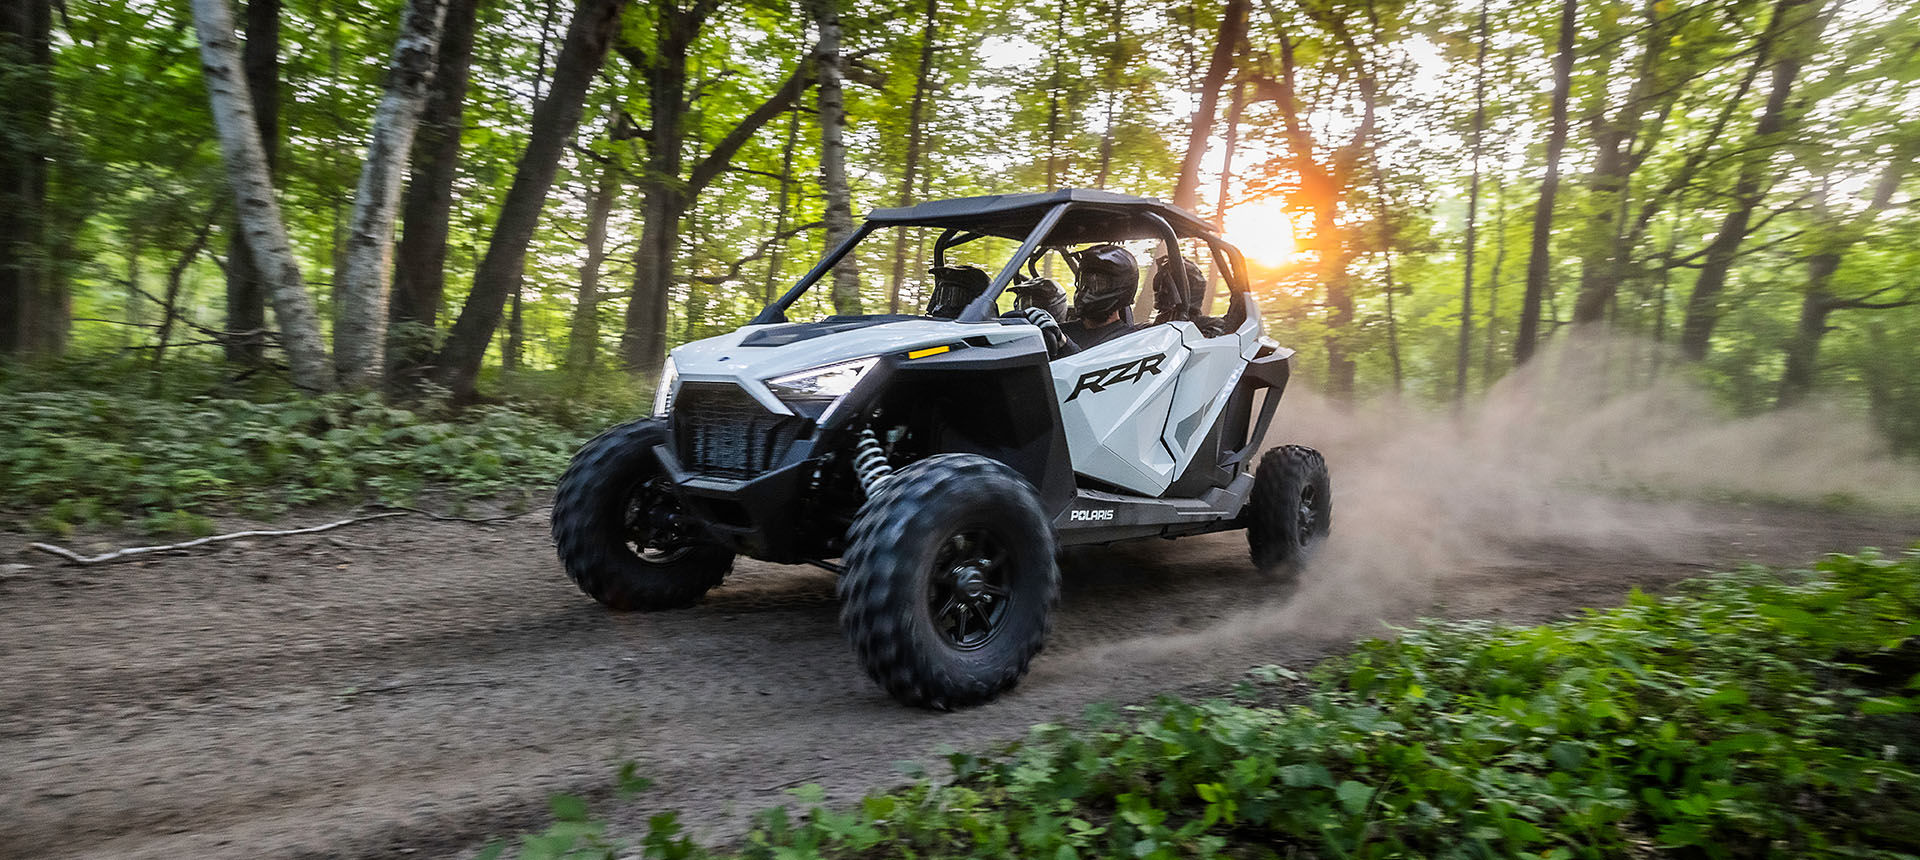 Off-road Polaris RZR Pro parked on dirt trail